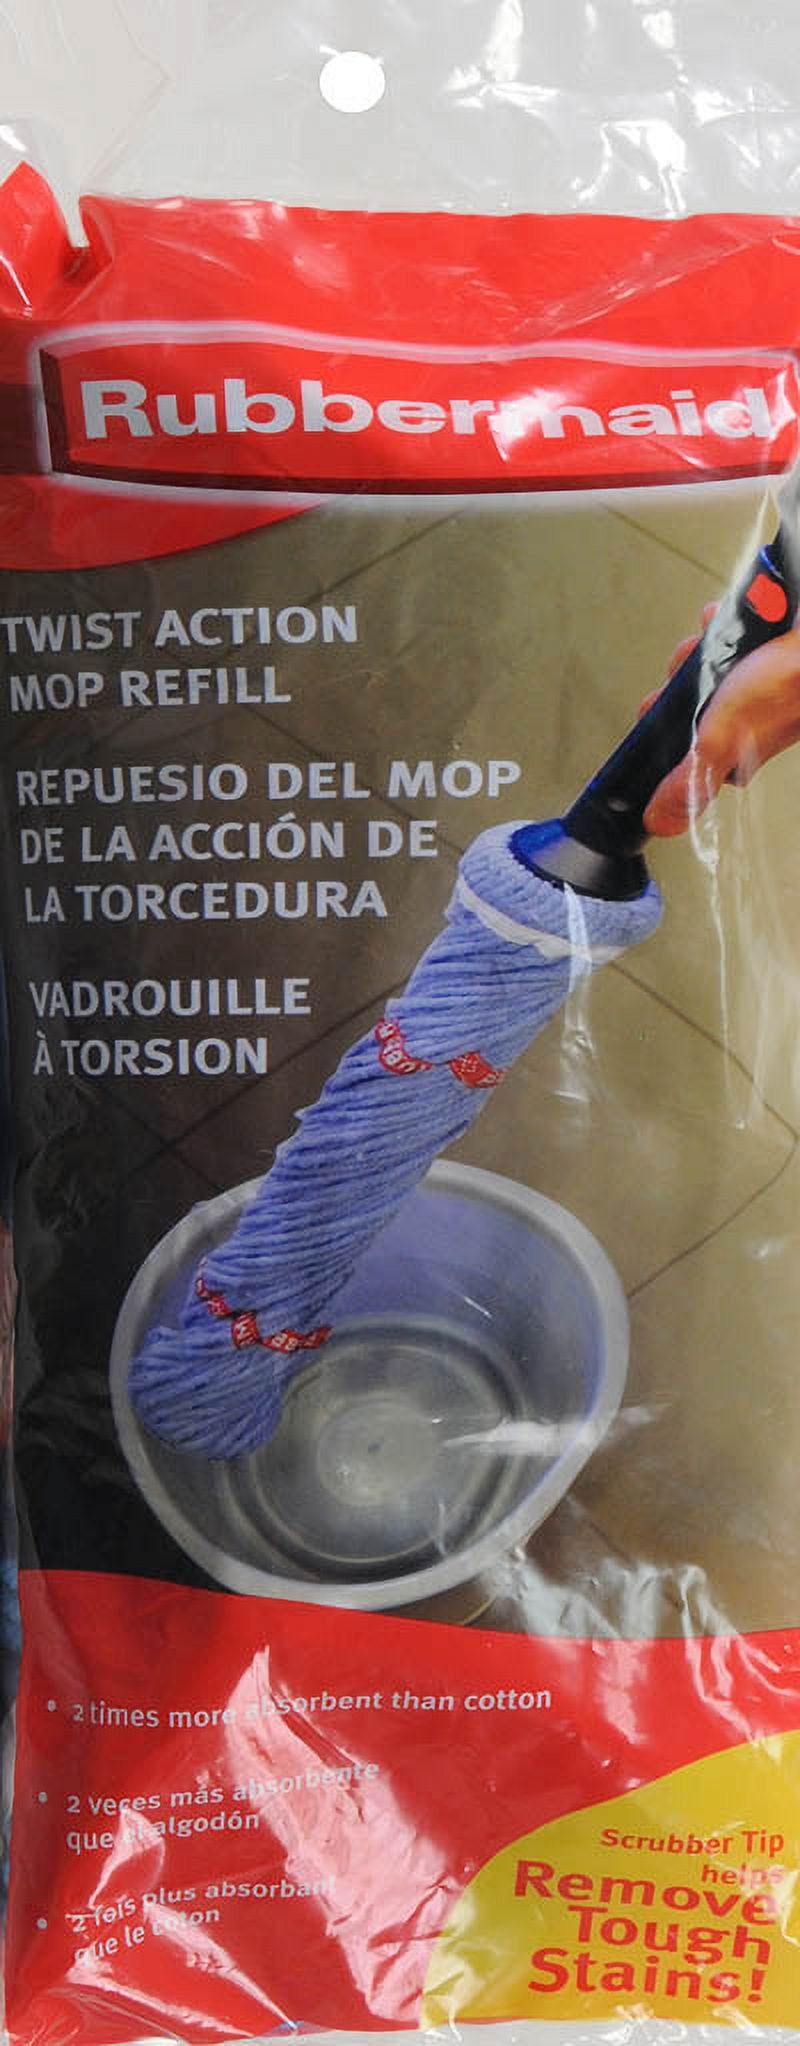 Rubbermaid Twist Action Mop Refill Replacement Mopping Head - FG6B1204  41301001938